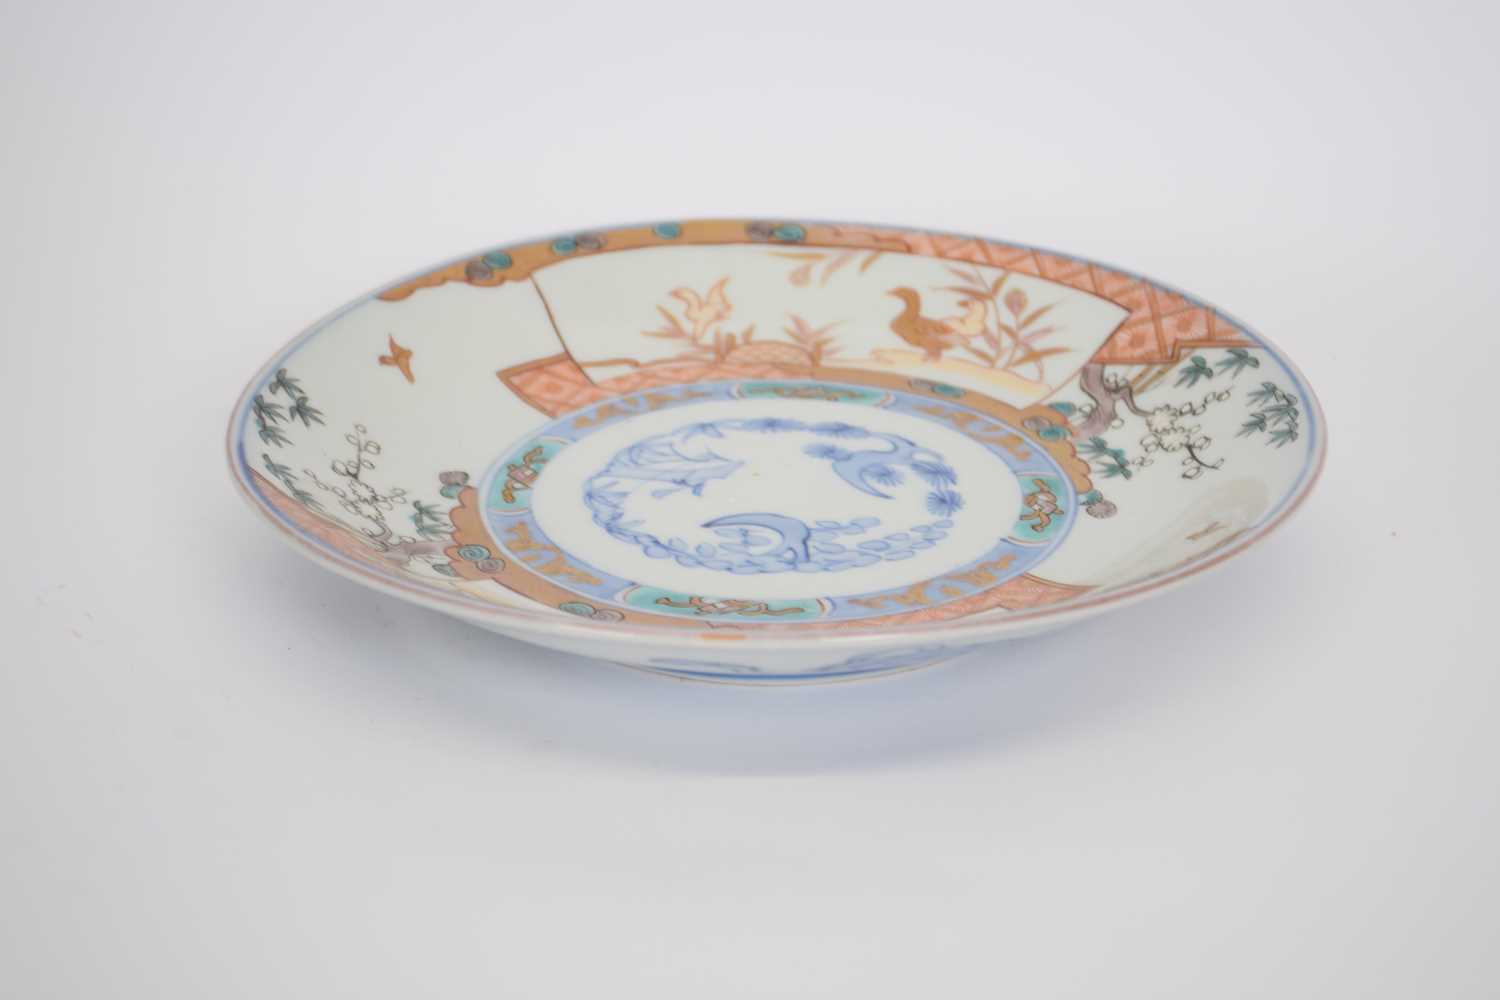 Japanese porcelain plate with Imari design - Image 5 of 6